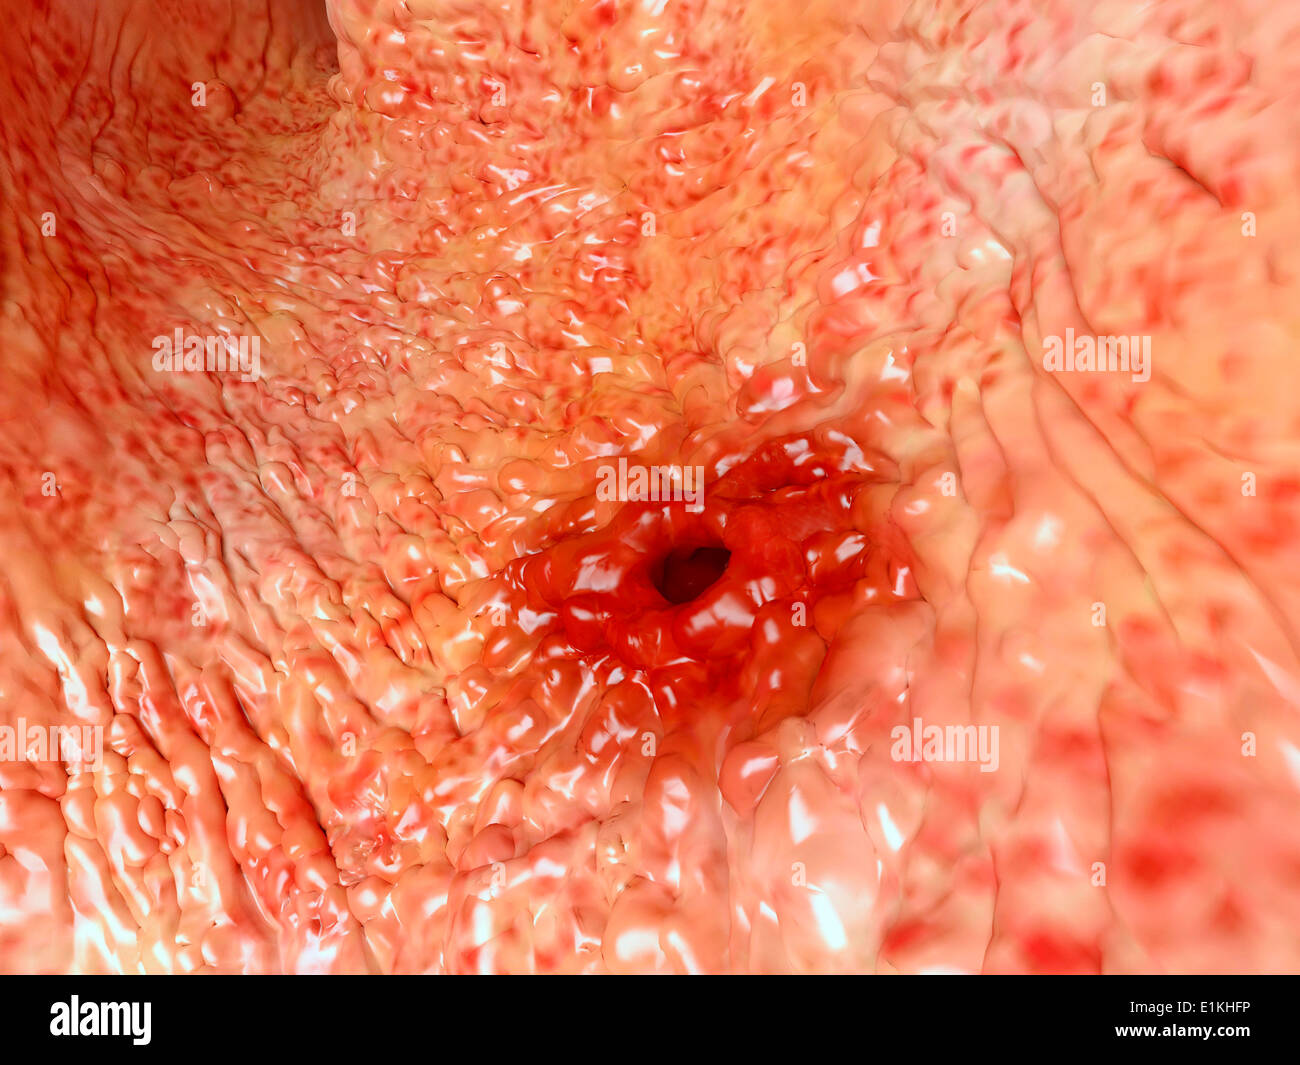 Artwork based on an endoscopic image of a stomach ulcer. Stock Photo